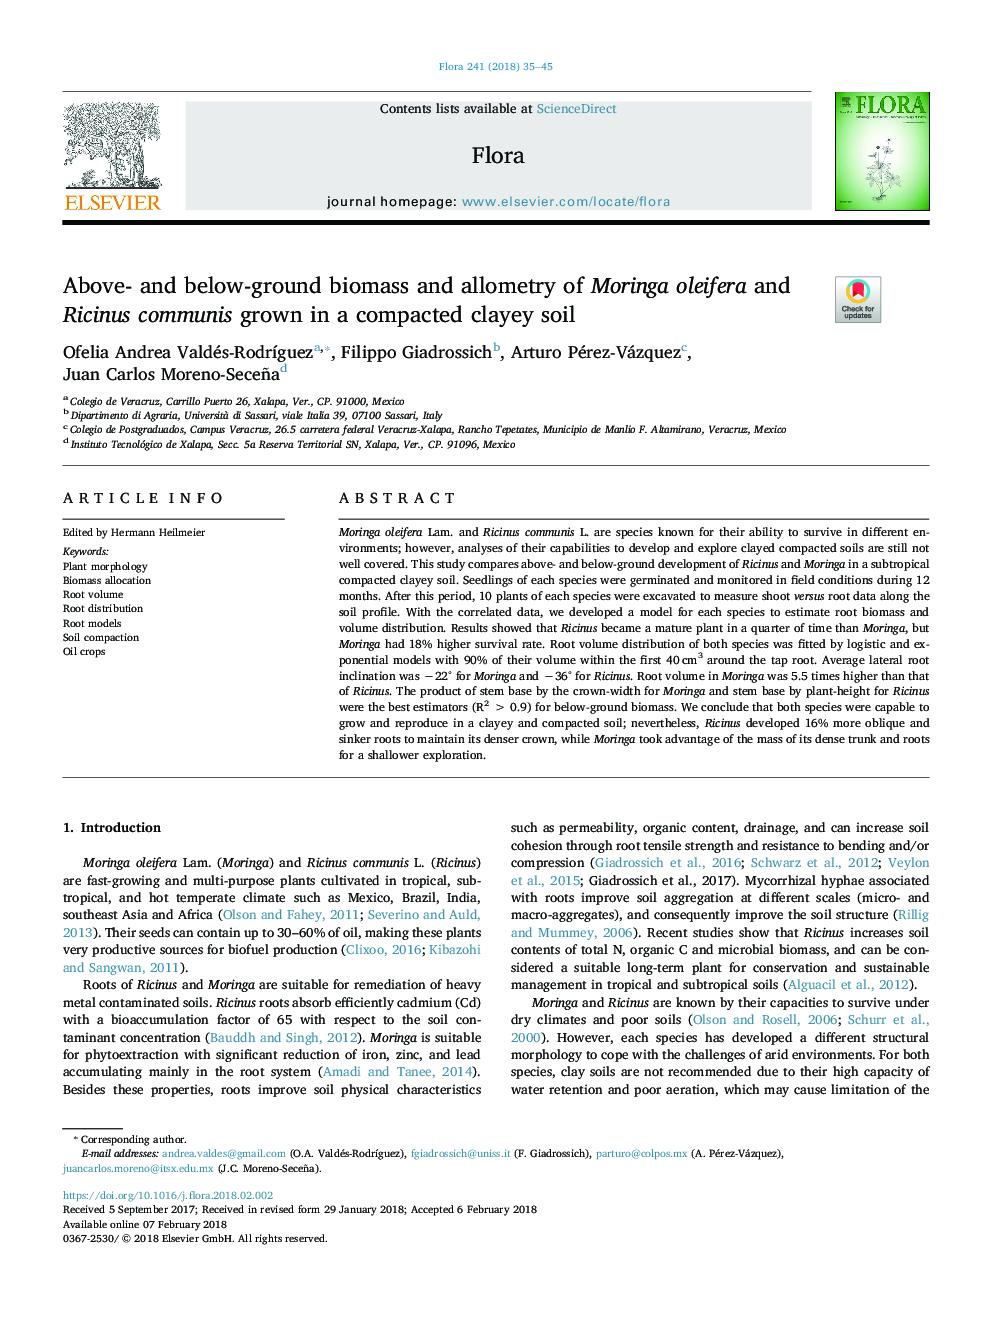 Above- and below-ground biomass and allometry of Moringa oleifera and Ricinus communis grown in a compacted clayey soil